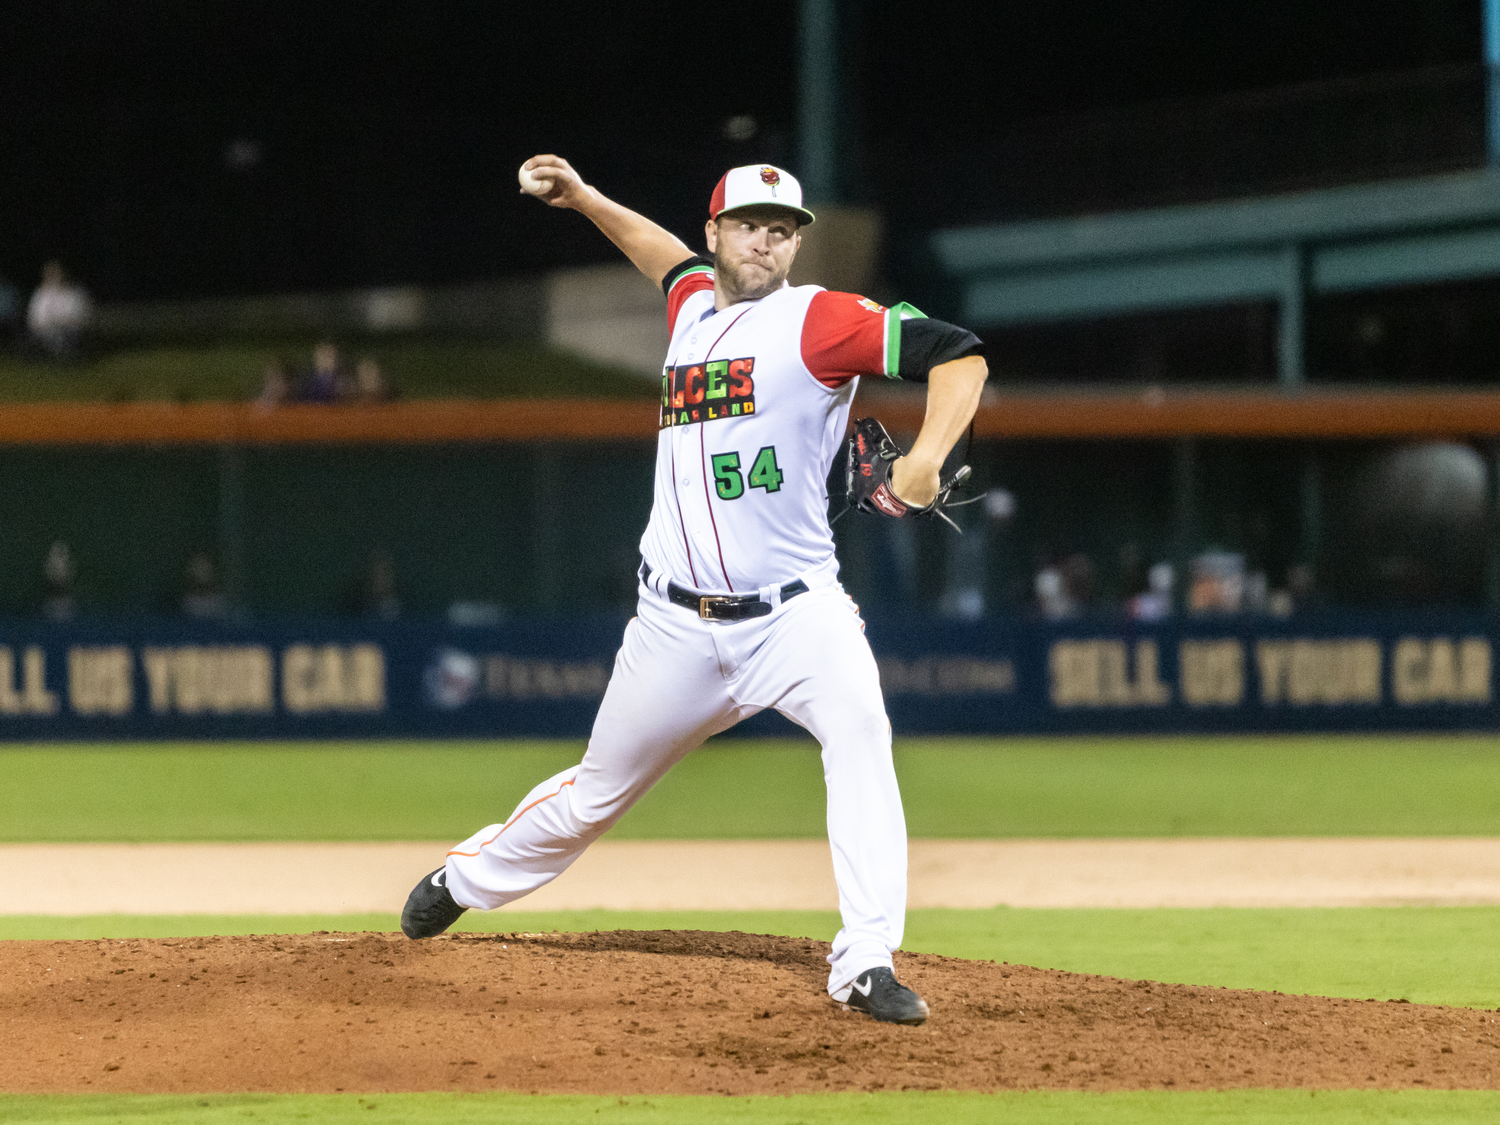 Kyle McGowin in his debut for the Sugar Land Space Cowboys on Thursday, May 11, in which he pitched three scoreless innings.    SONNY JOHNSTON/SUGAR LAND SPACE COWBOYS